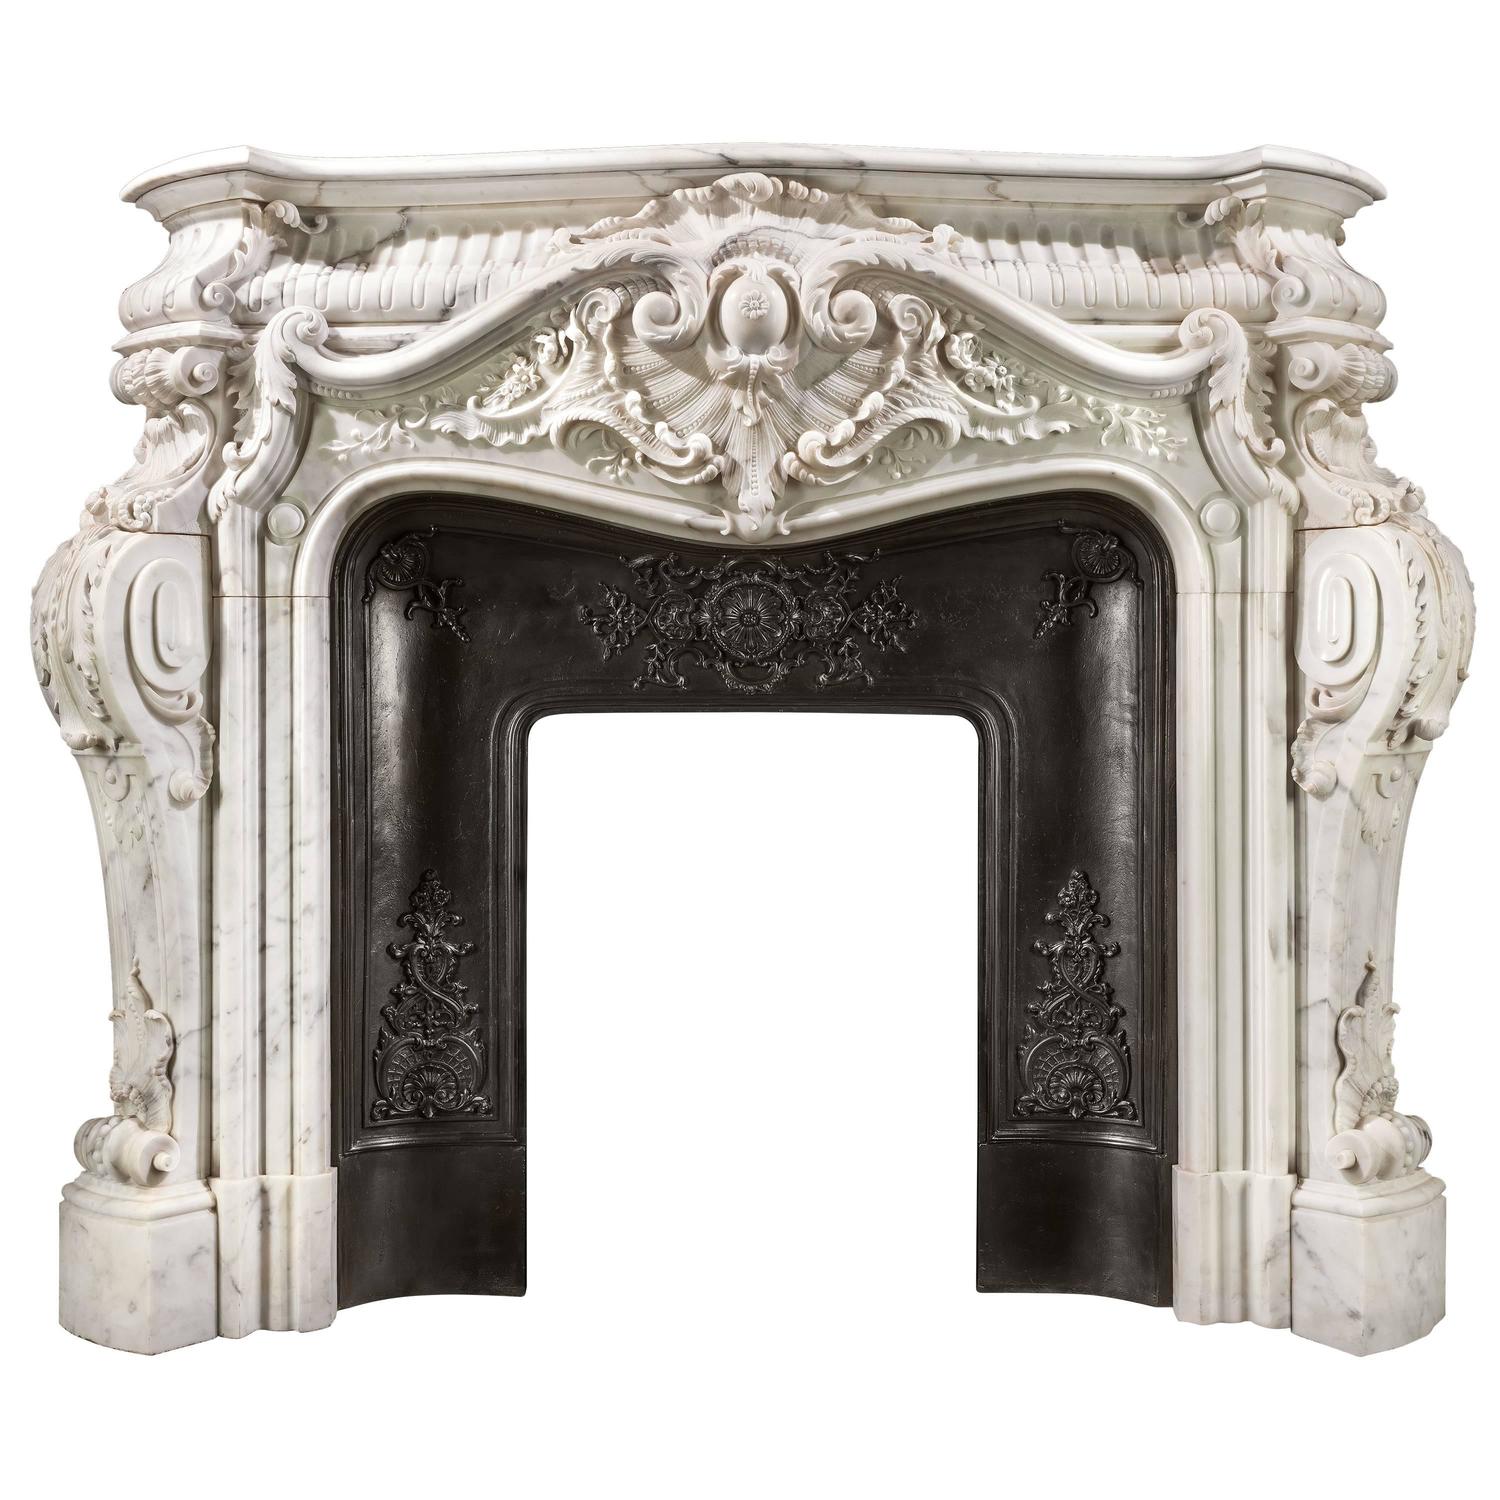  Monumental and Highly Ornate French Rococo Fireplace in Statuary Marble For Sale at 1stdibs